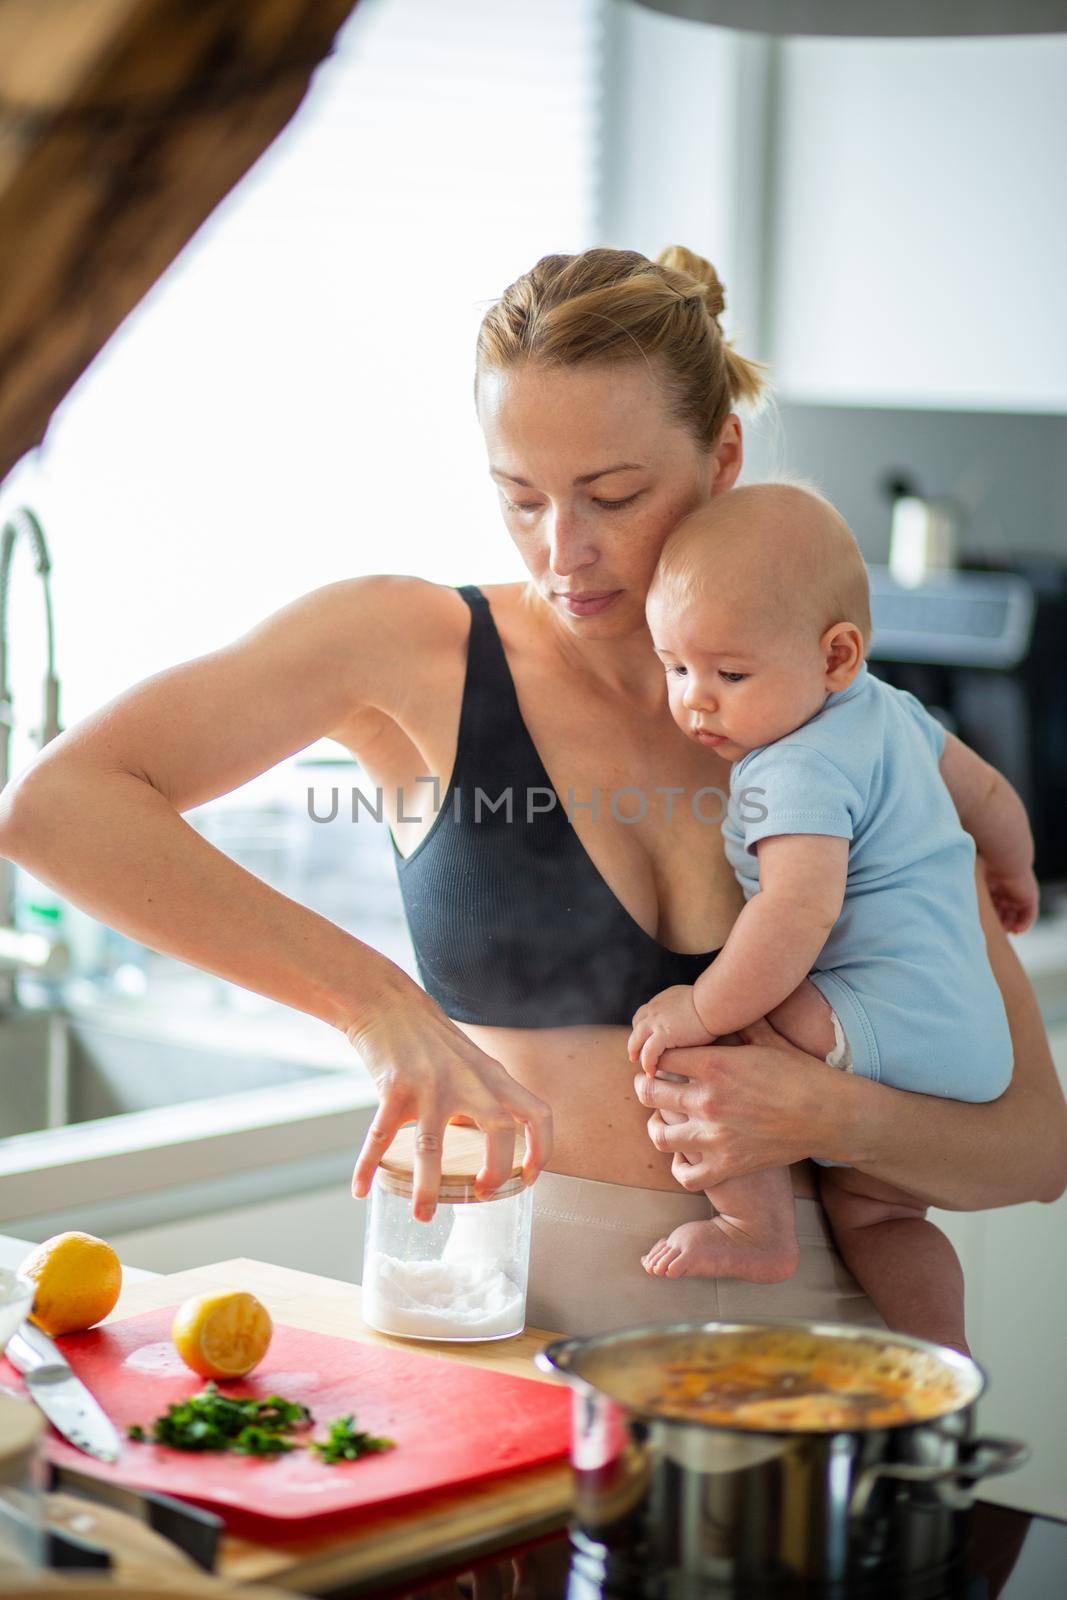 Woman cooking while holding four months old baby boy in her hands.